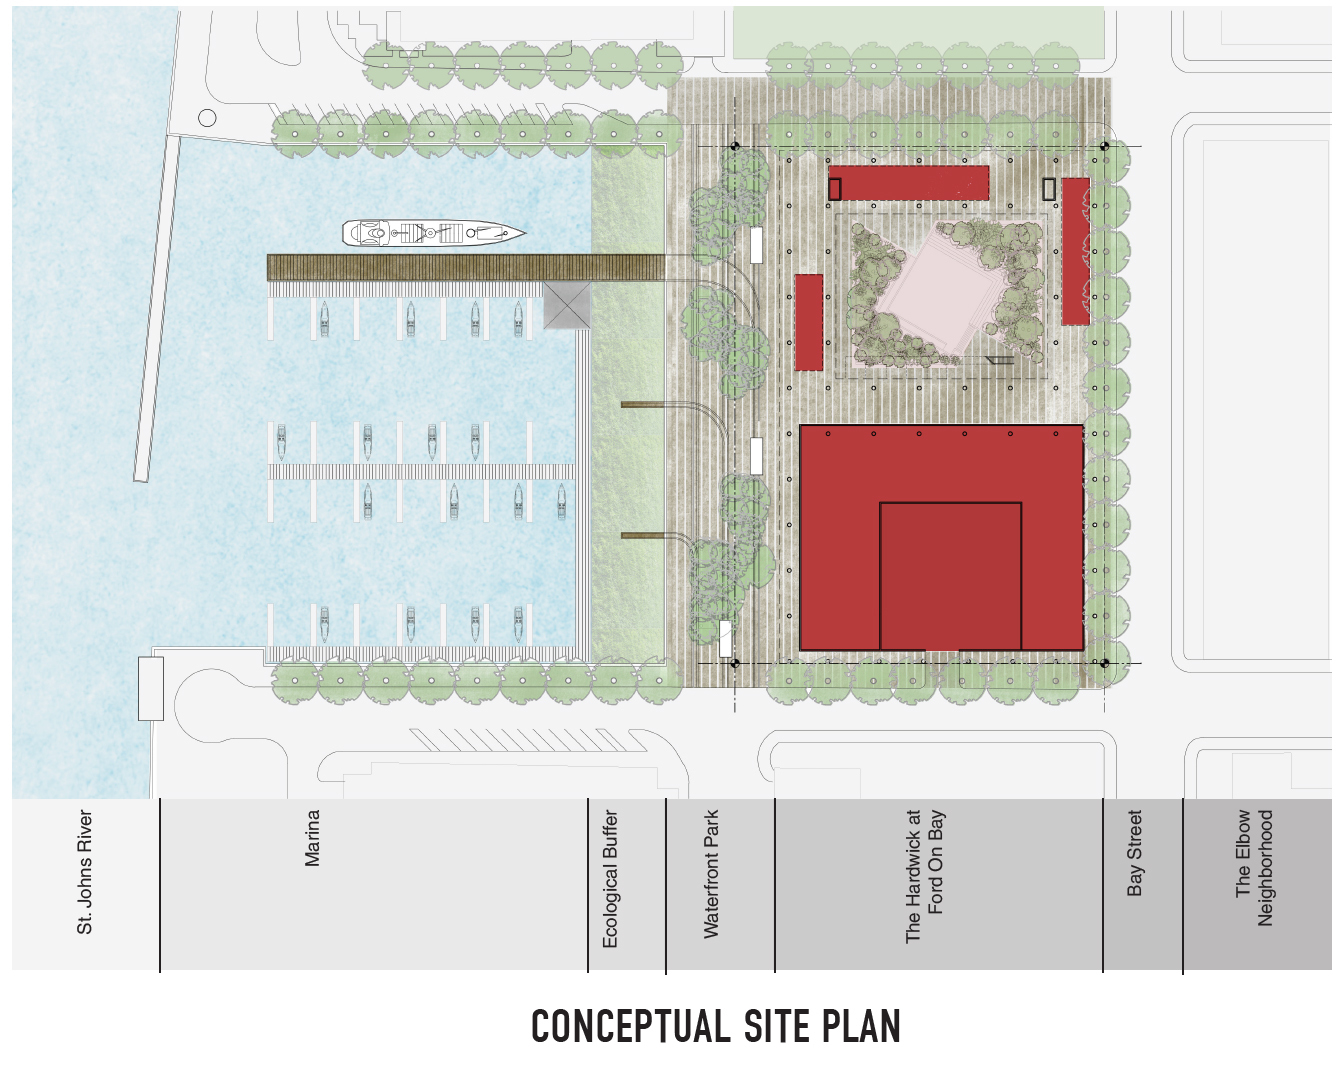 The conceptual site plan for The Hardwick.